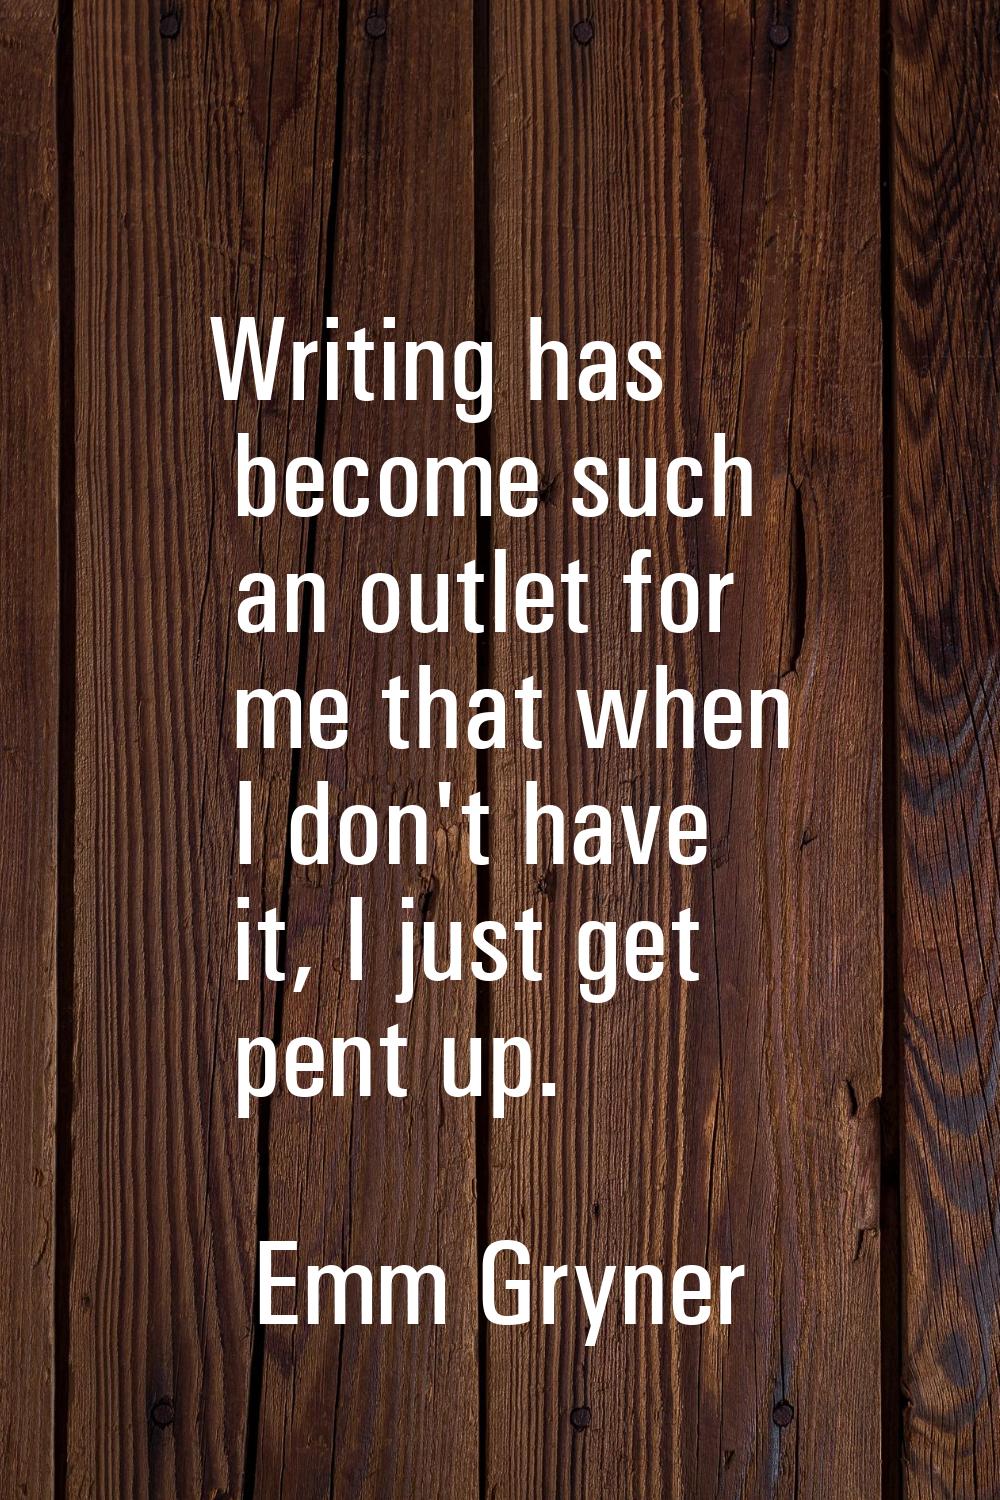 Writing has become such an outlet for me that when I don't have it, I just get pent up.